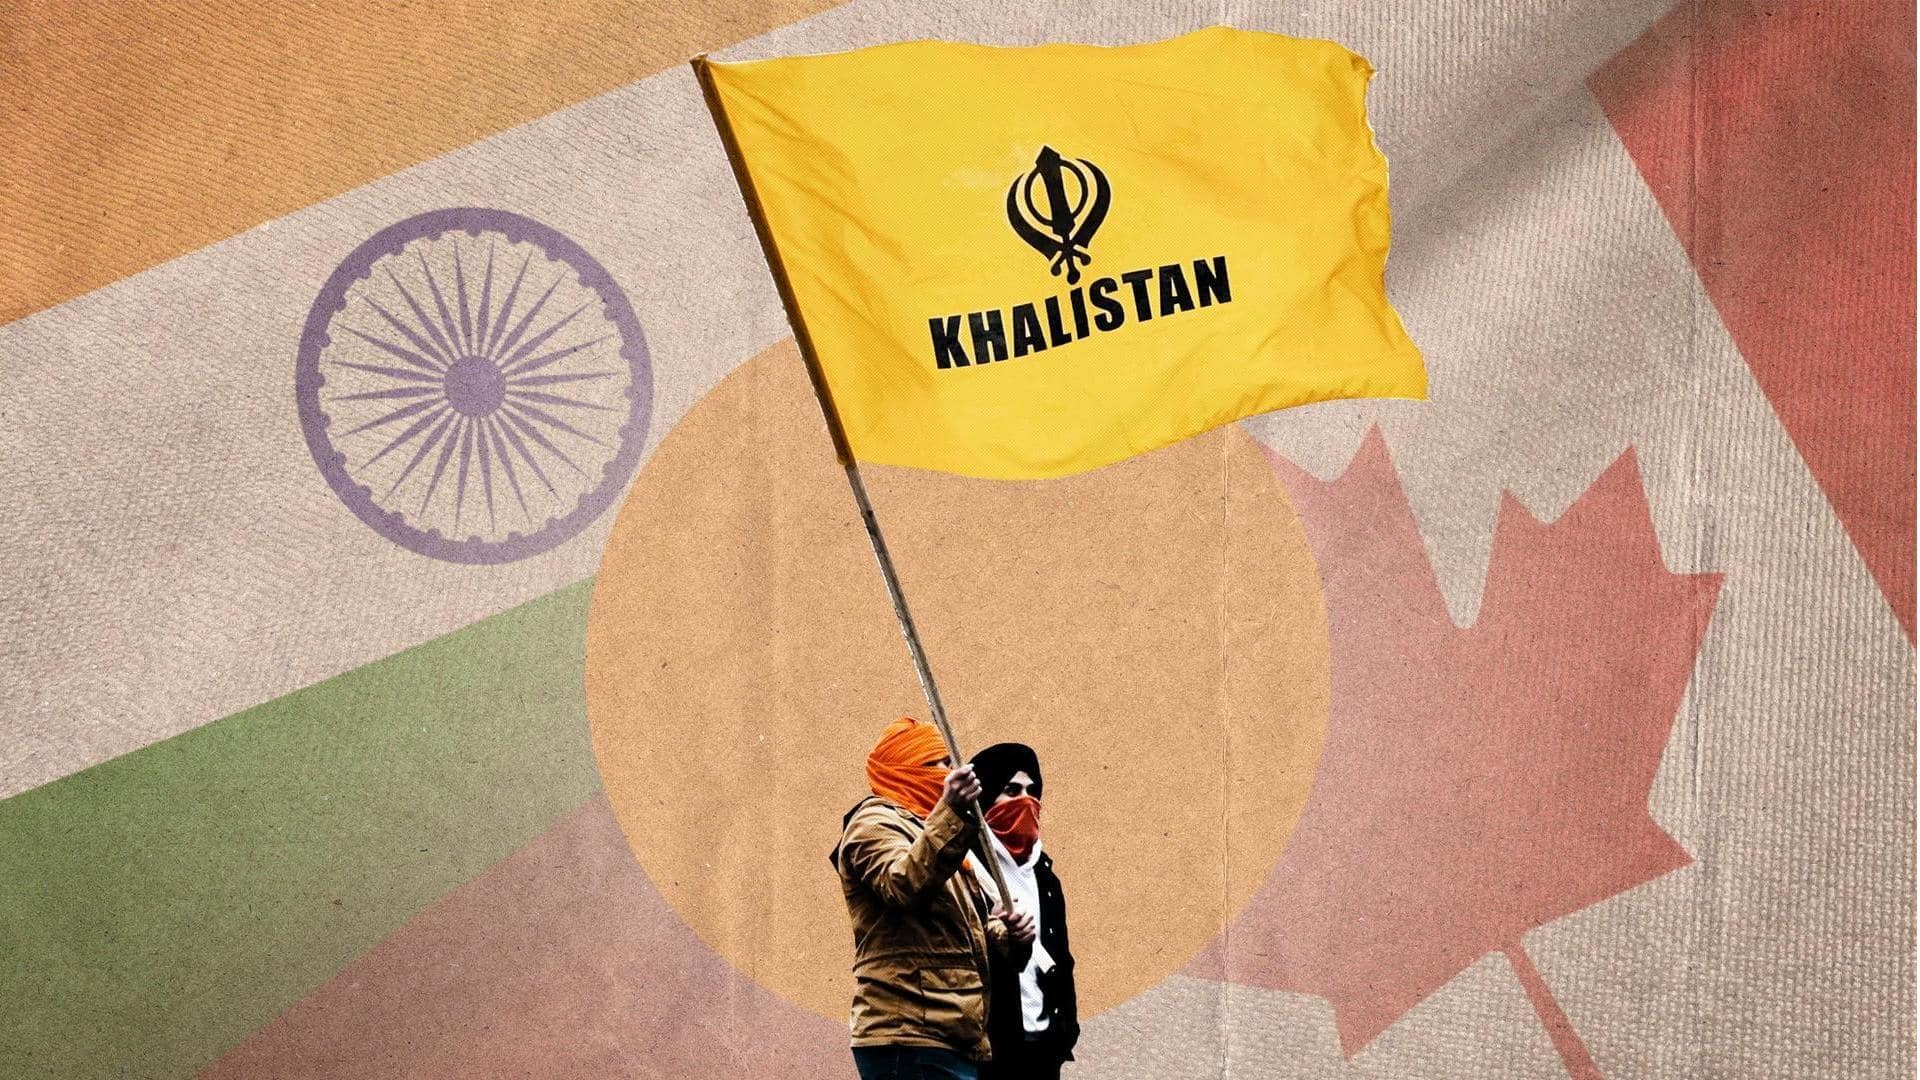 Khalistani group to hold 'anti-India' rally in Canada today: Report